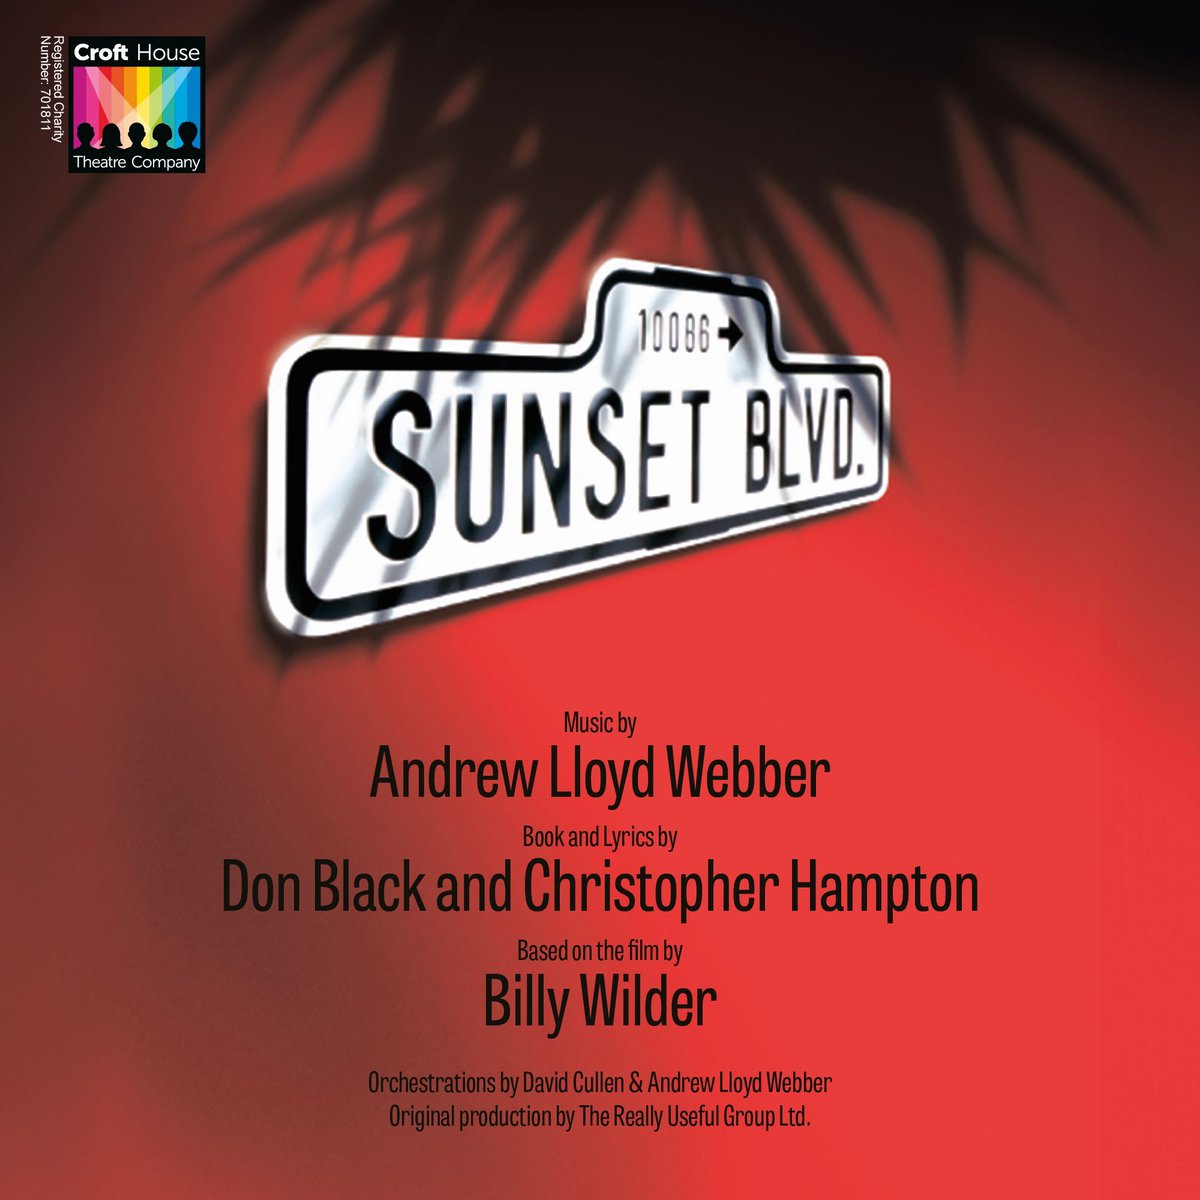 Opening next week, @CroftTheatreCo 's Sunset Boulevard! This amateur production of Andrew Lloyd Webber’s award-winning musical features the unmistakable classics, With One Look, As If We Never Said Goodbye and The Perfect Year. Tue 19 – Sat 23 Mar: buff.ly/3TyB5W9